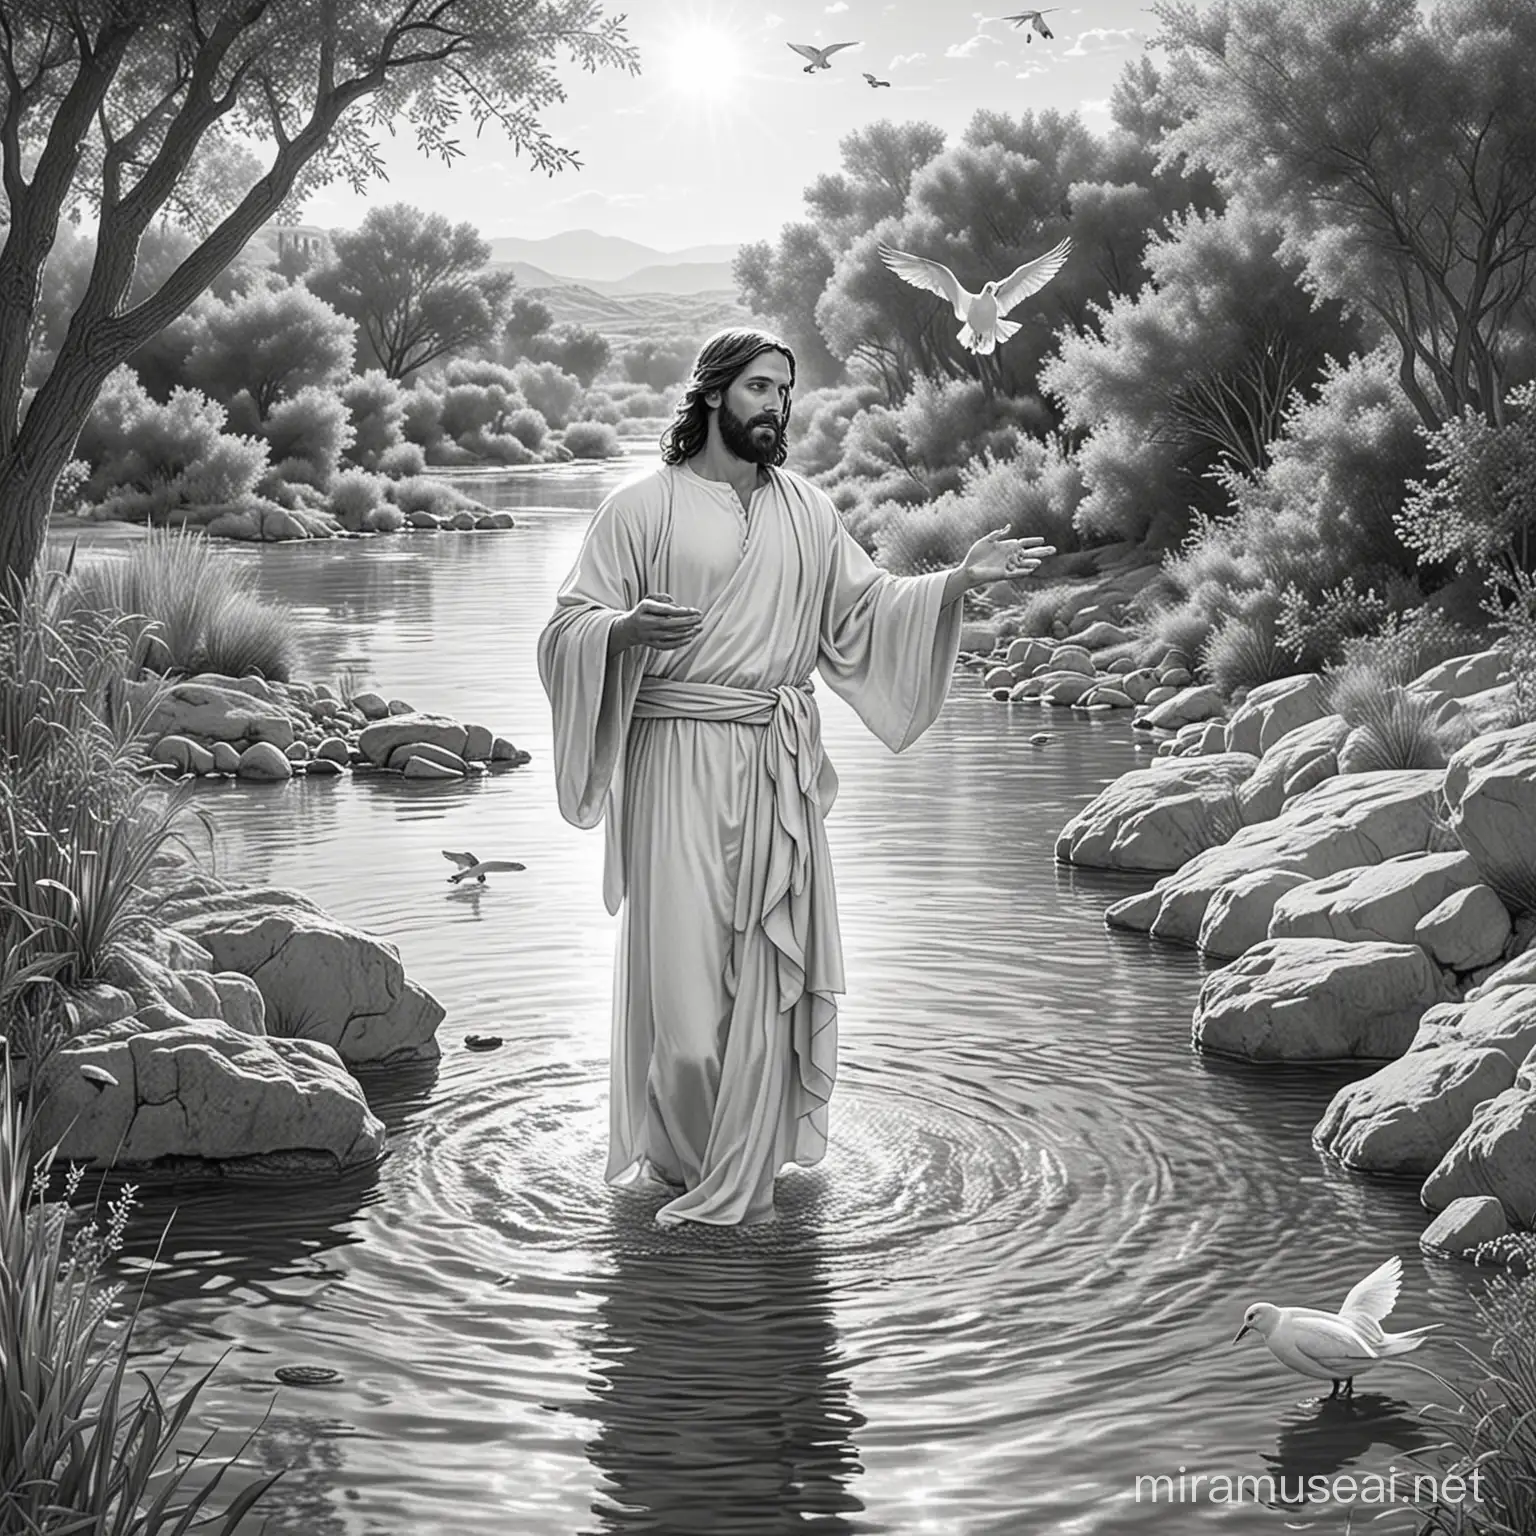 "Create an image suitable for a coloring book depicting the baptism of Christ. Capture the serene moment as Jesus stands in the river Jordan, with John the Baptist pouring water over him, while a dove descends from above. Ensure the scene radiates peace and spiritual significance, inviting children to color it with joy and reverence."
